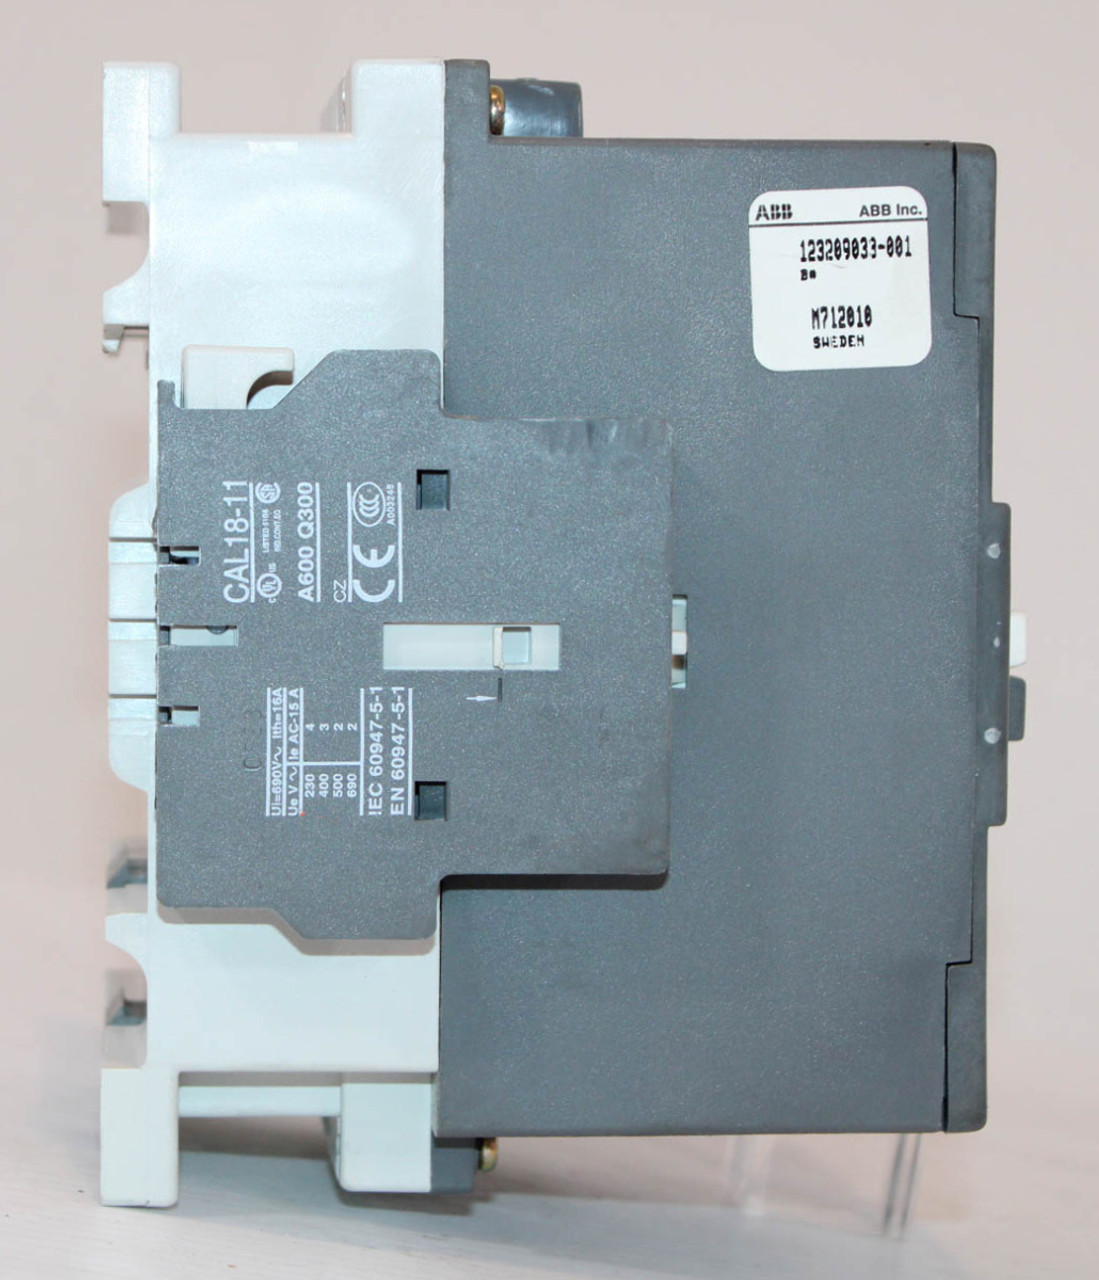 ABB AE130-30-11-81 Contactor 24V Coil w/Auxiliary CAL18-11 and CCL18-01